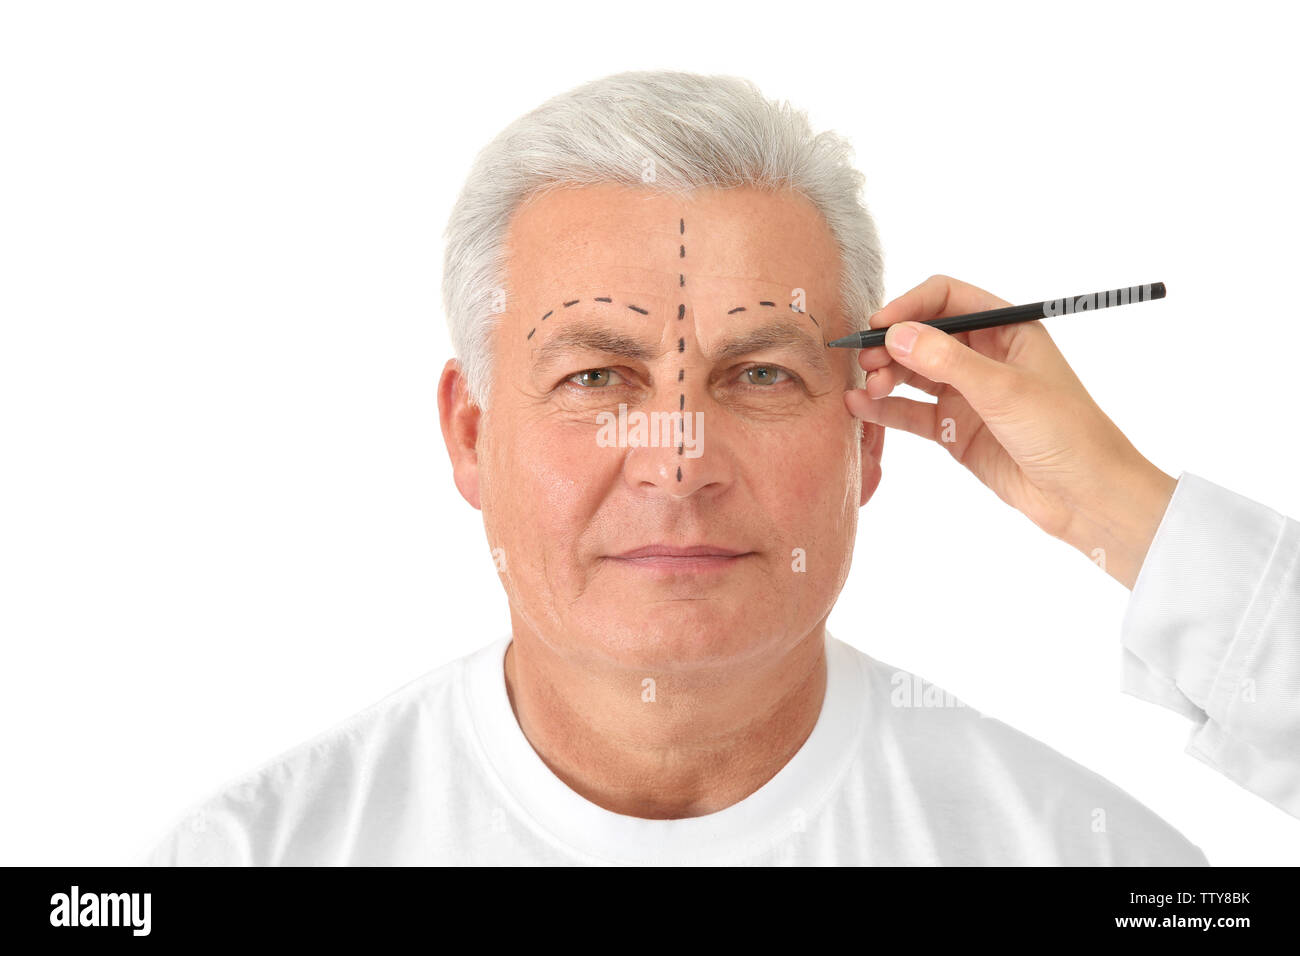 Female hand drawing correction line on man's face on white background Stock Photo